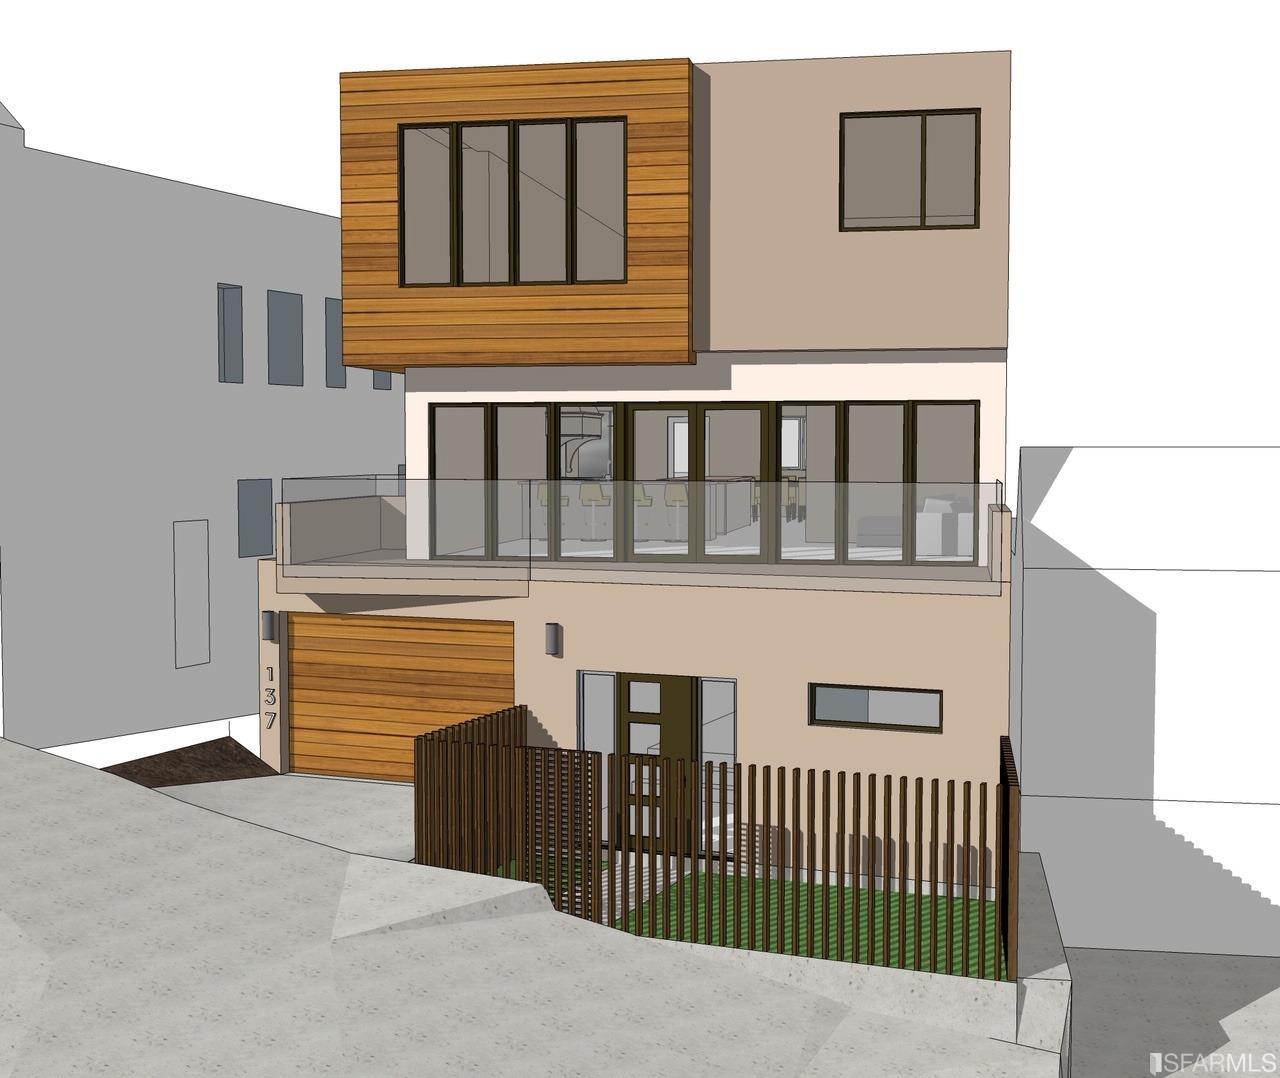 Rendering of exterior of property with submitted plans to build at 141 Milton. Currently a vacant lot.